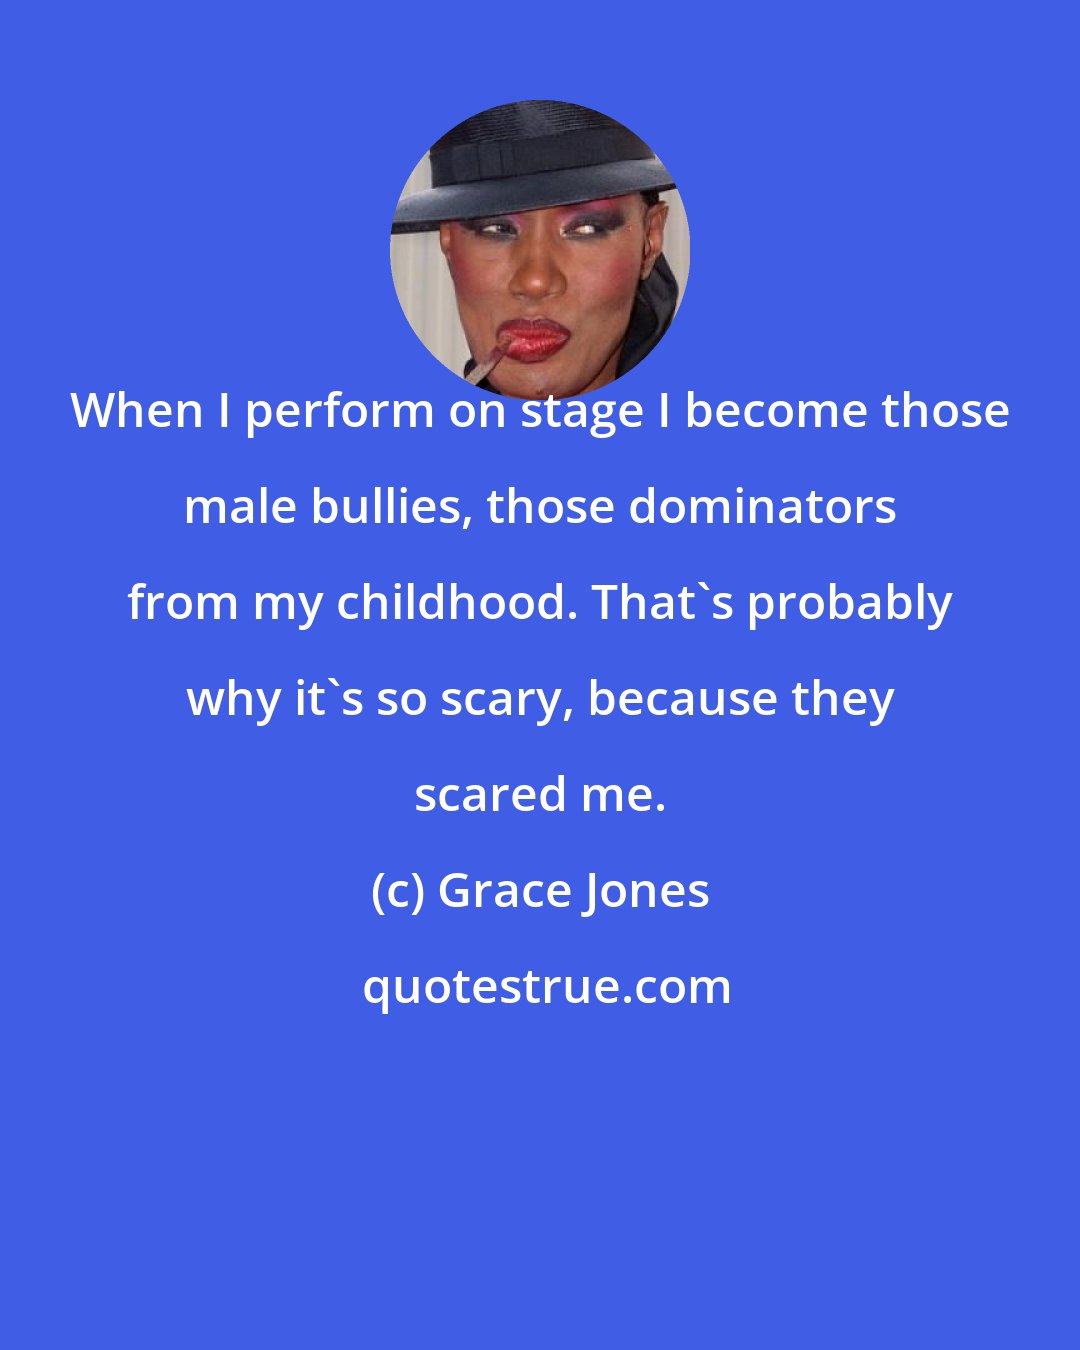 Grace Jones: When I perform on stage I become those male bullies, those dominators from my childhood. That's probably why it's so scary, because they scared me.